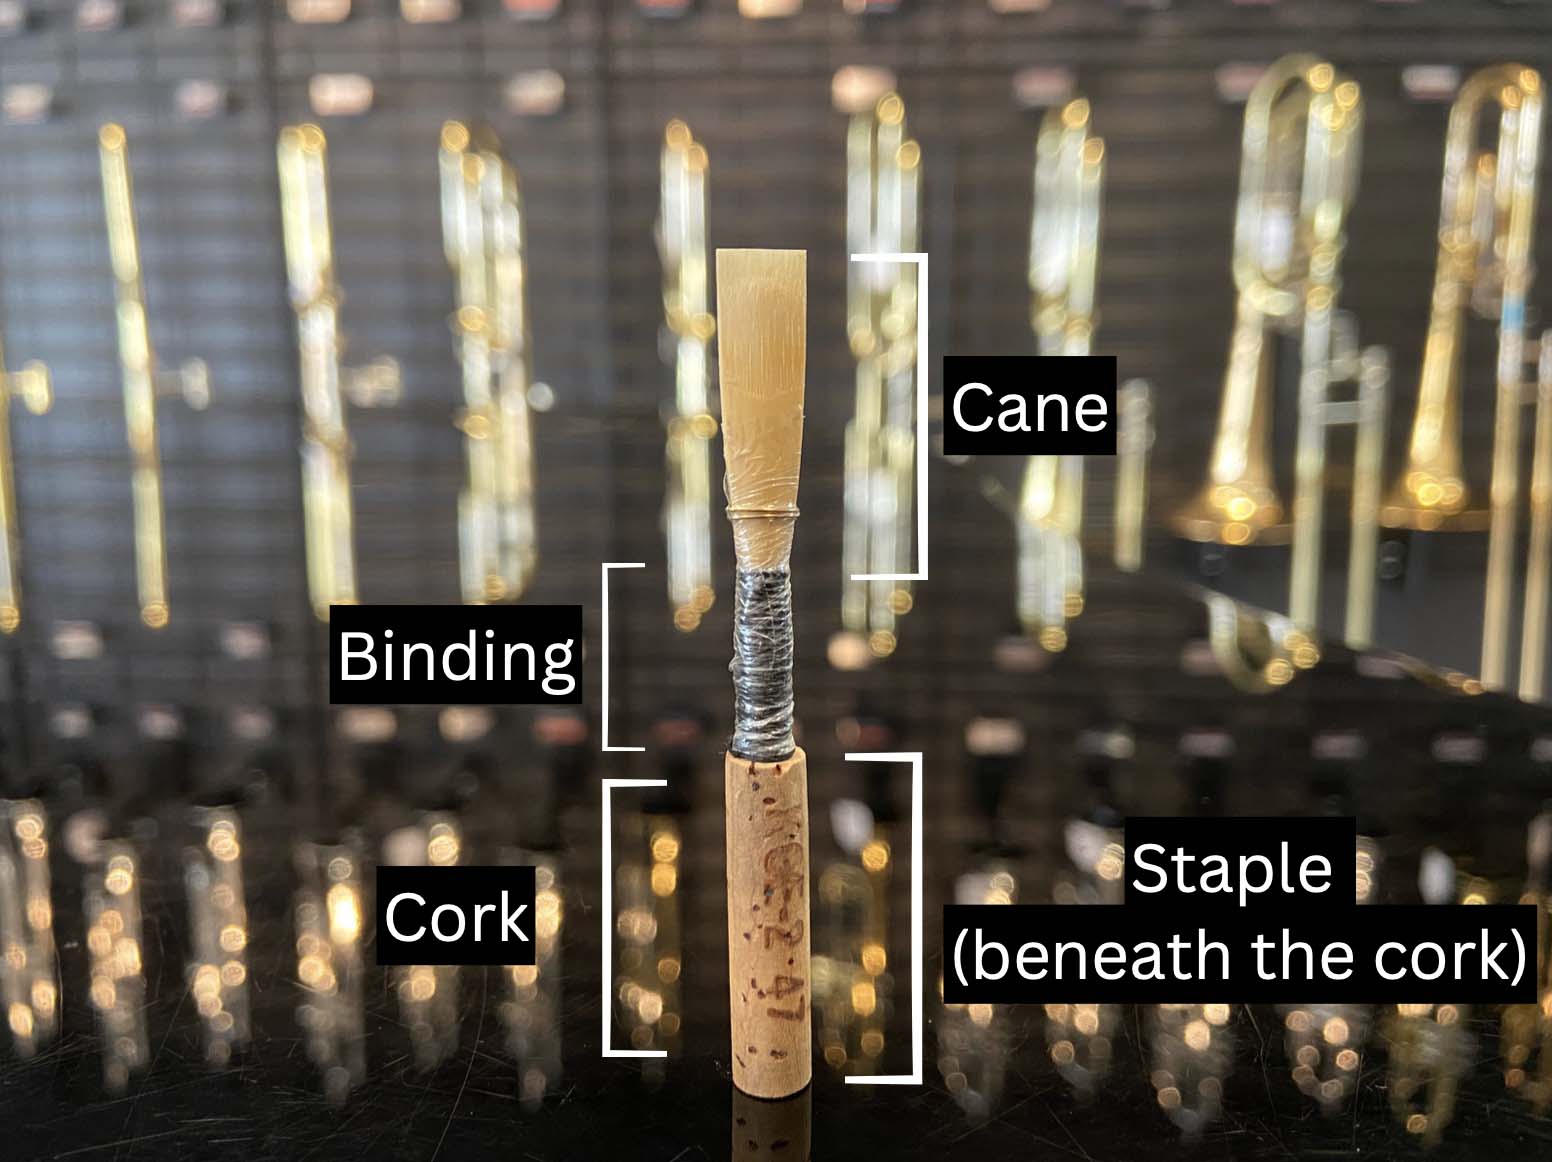 Diagram of an oboe reed. Top of the reed is the cane. The binding is in the middle, and the cork is at the bottom. The staple is beneath the cork.